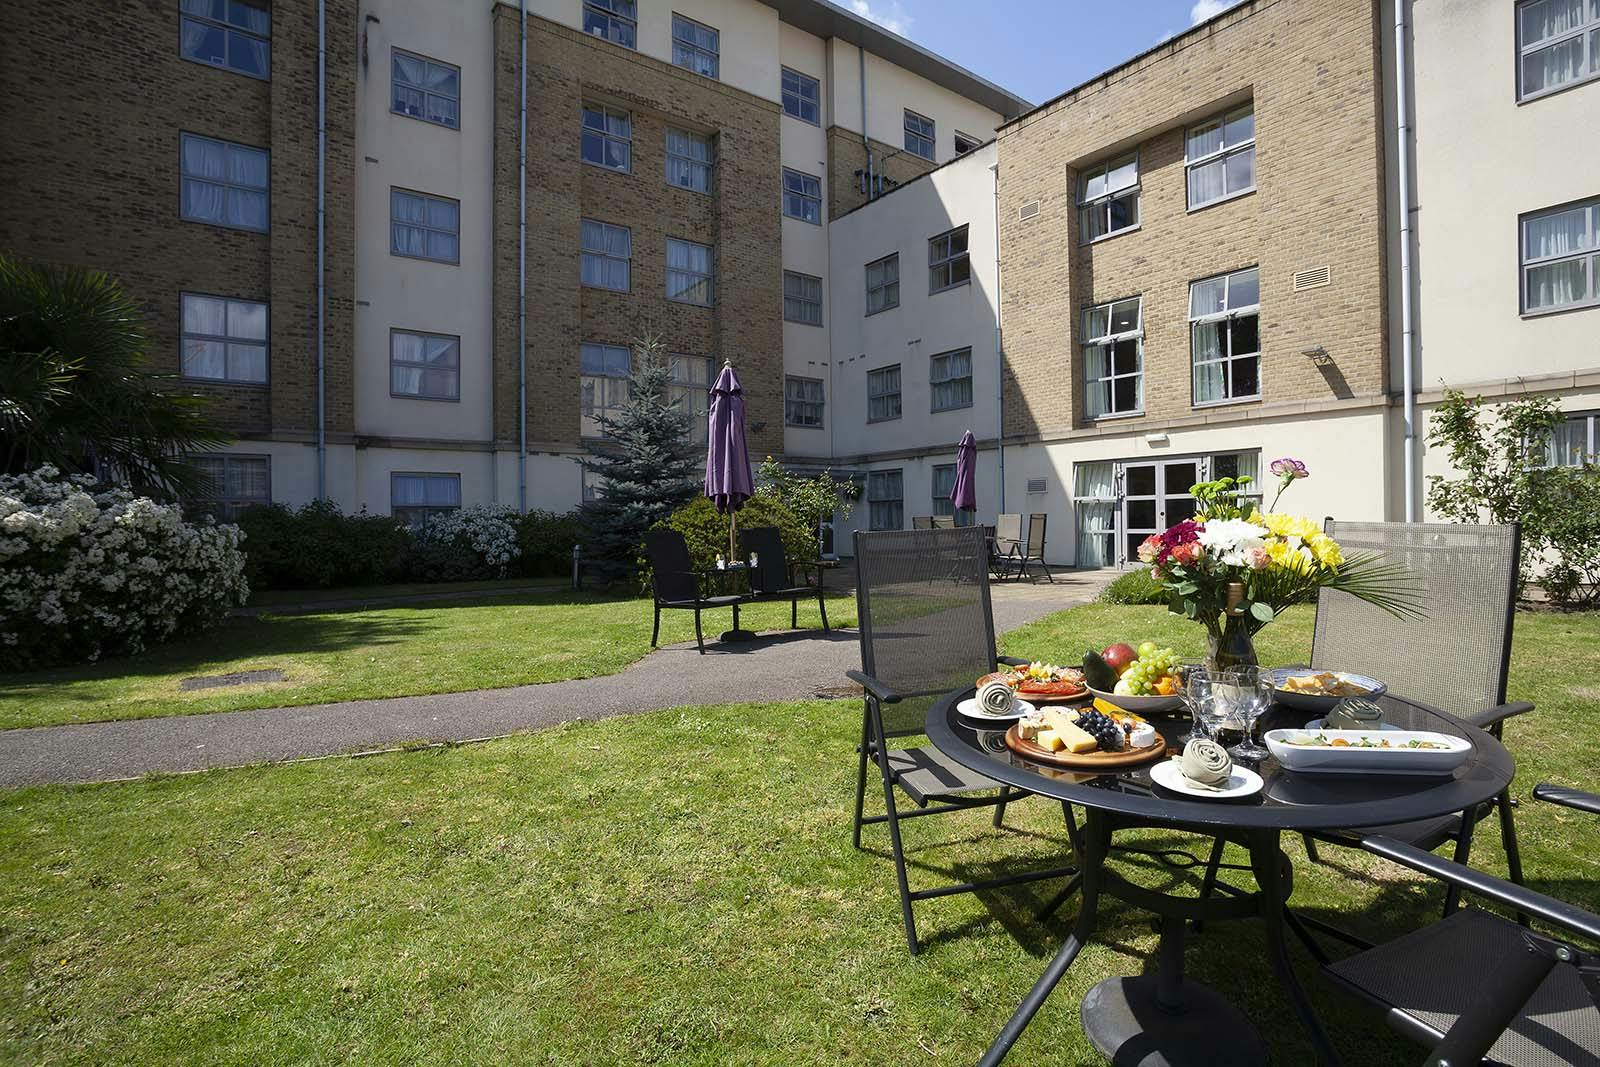 Garden area of Albany Lodge care home in Croydon, London